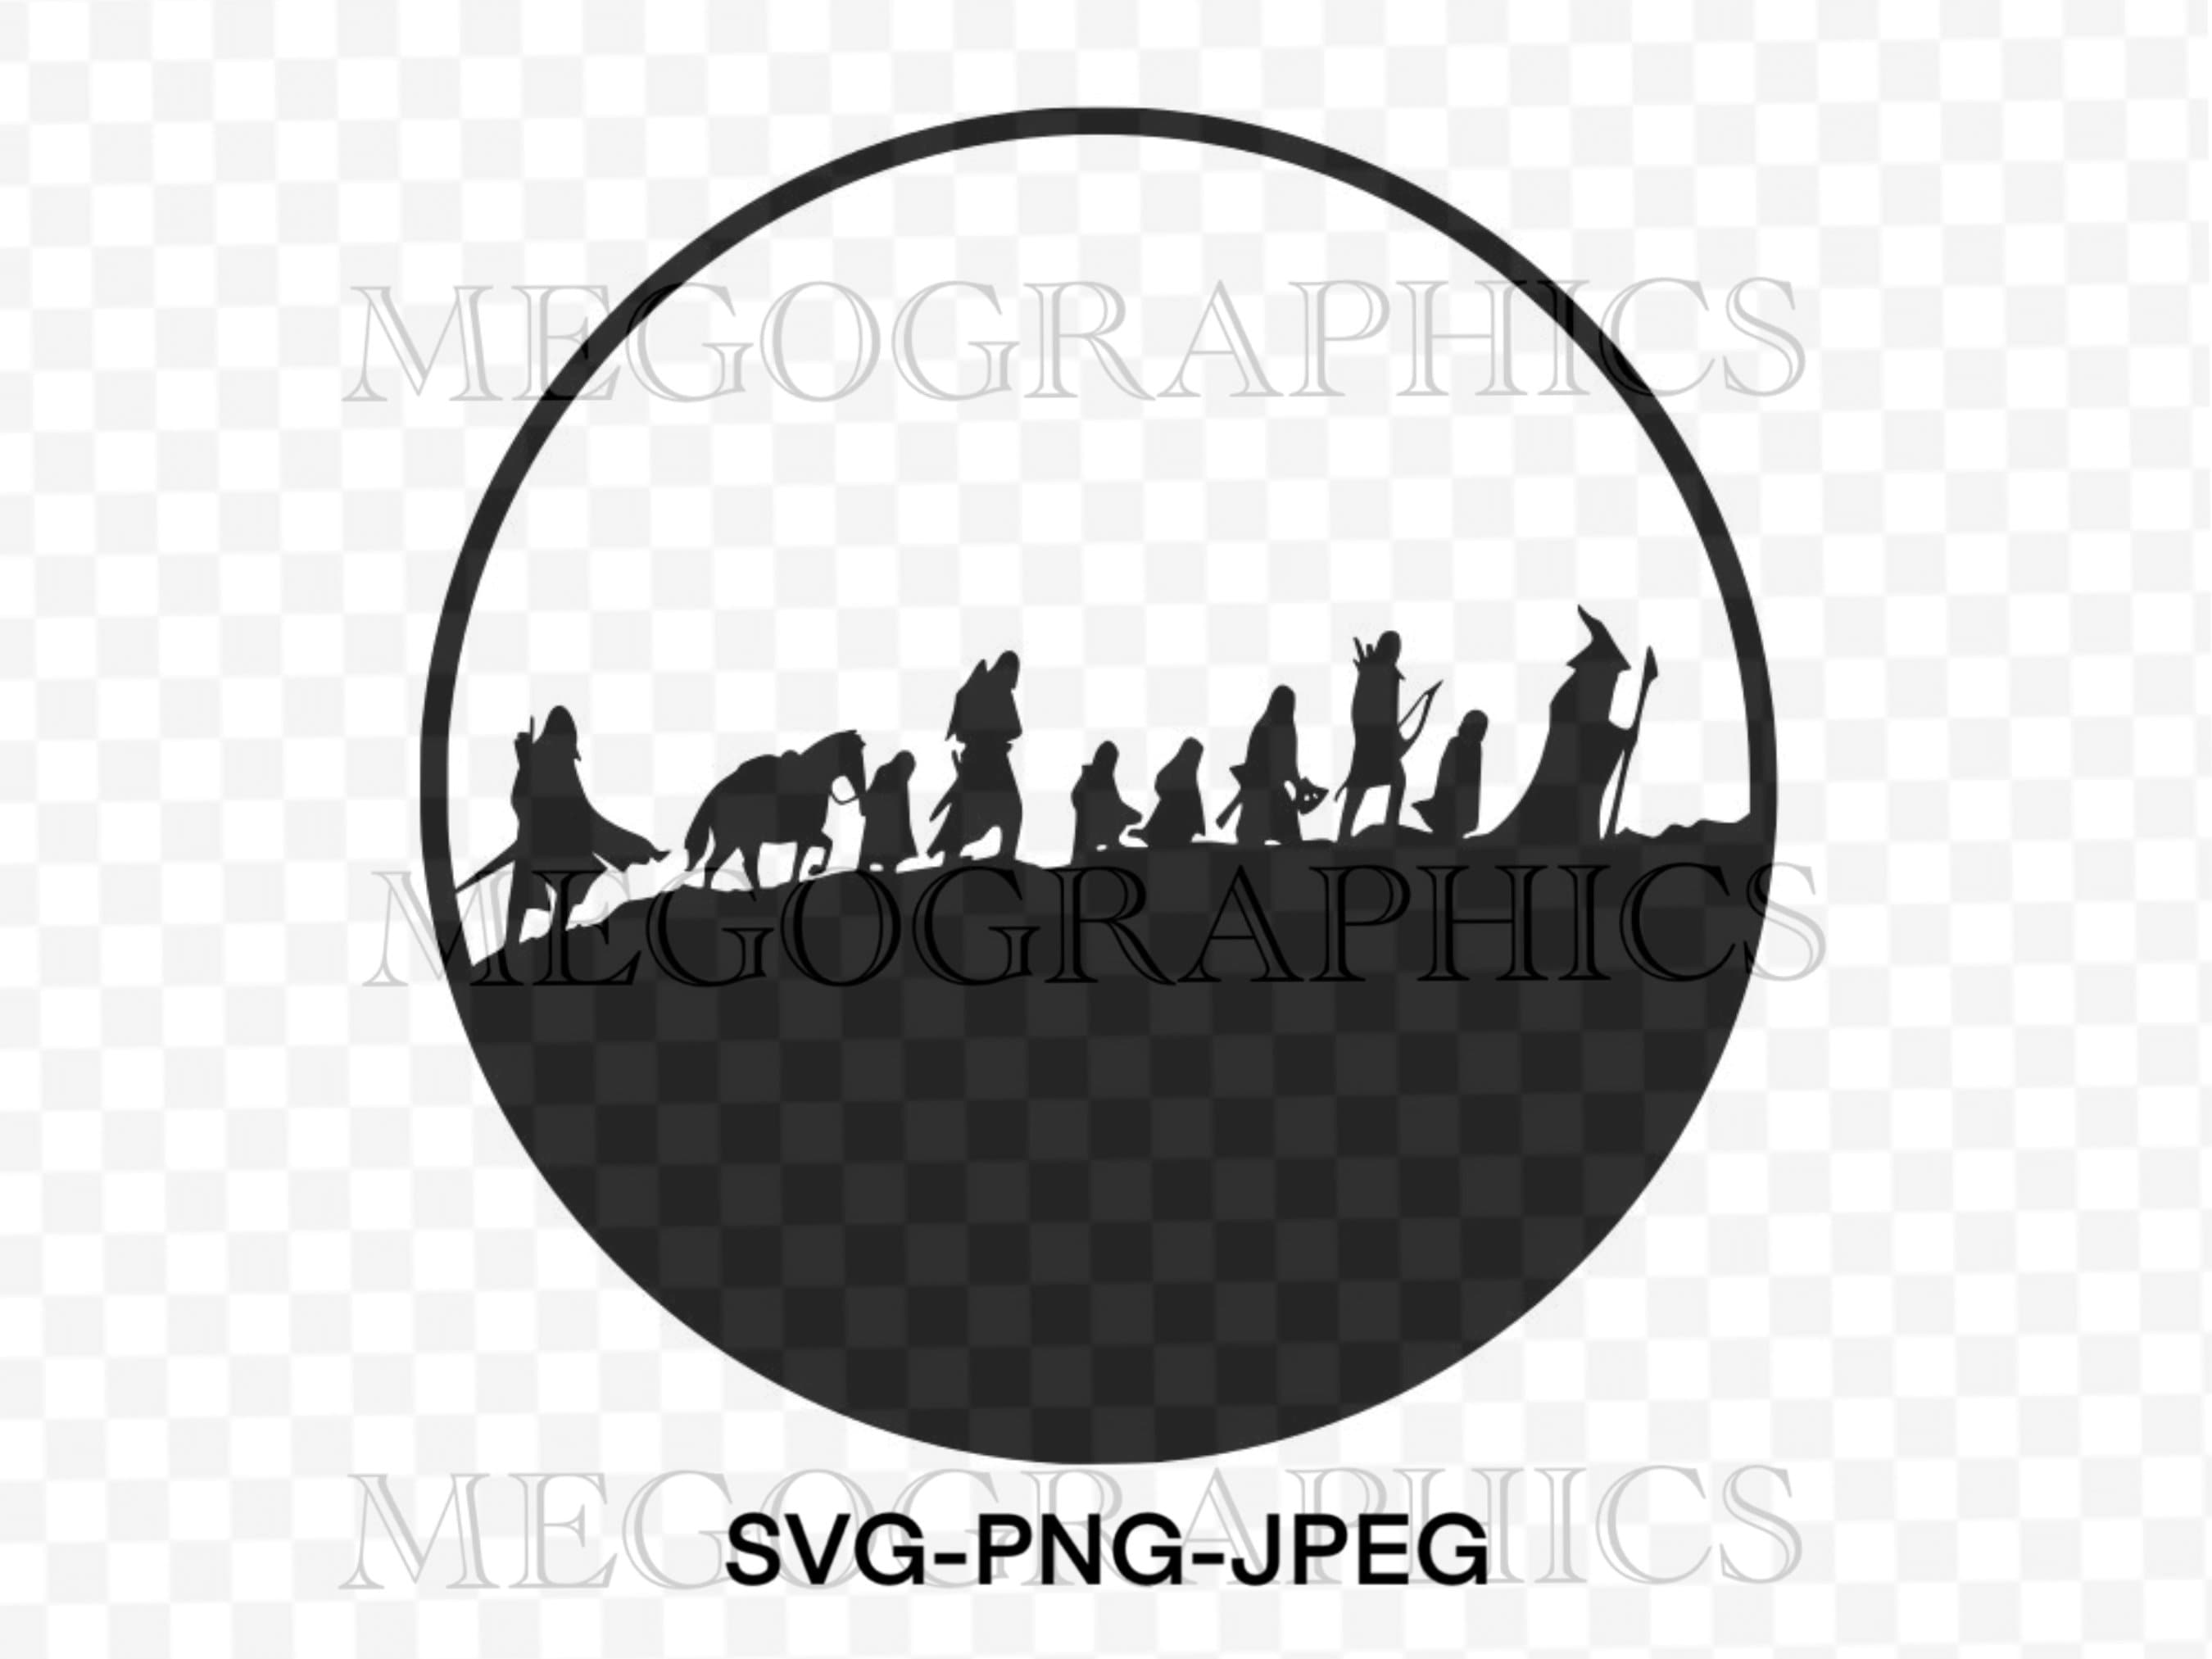 Lord of the Rings Svg Sauron Svg Lotr Svg Sticker (Download Now